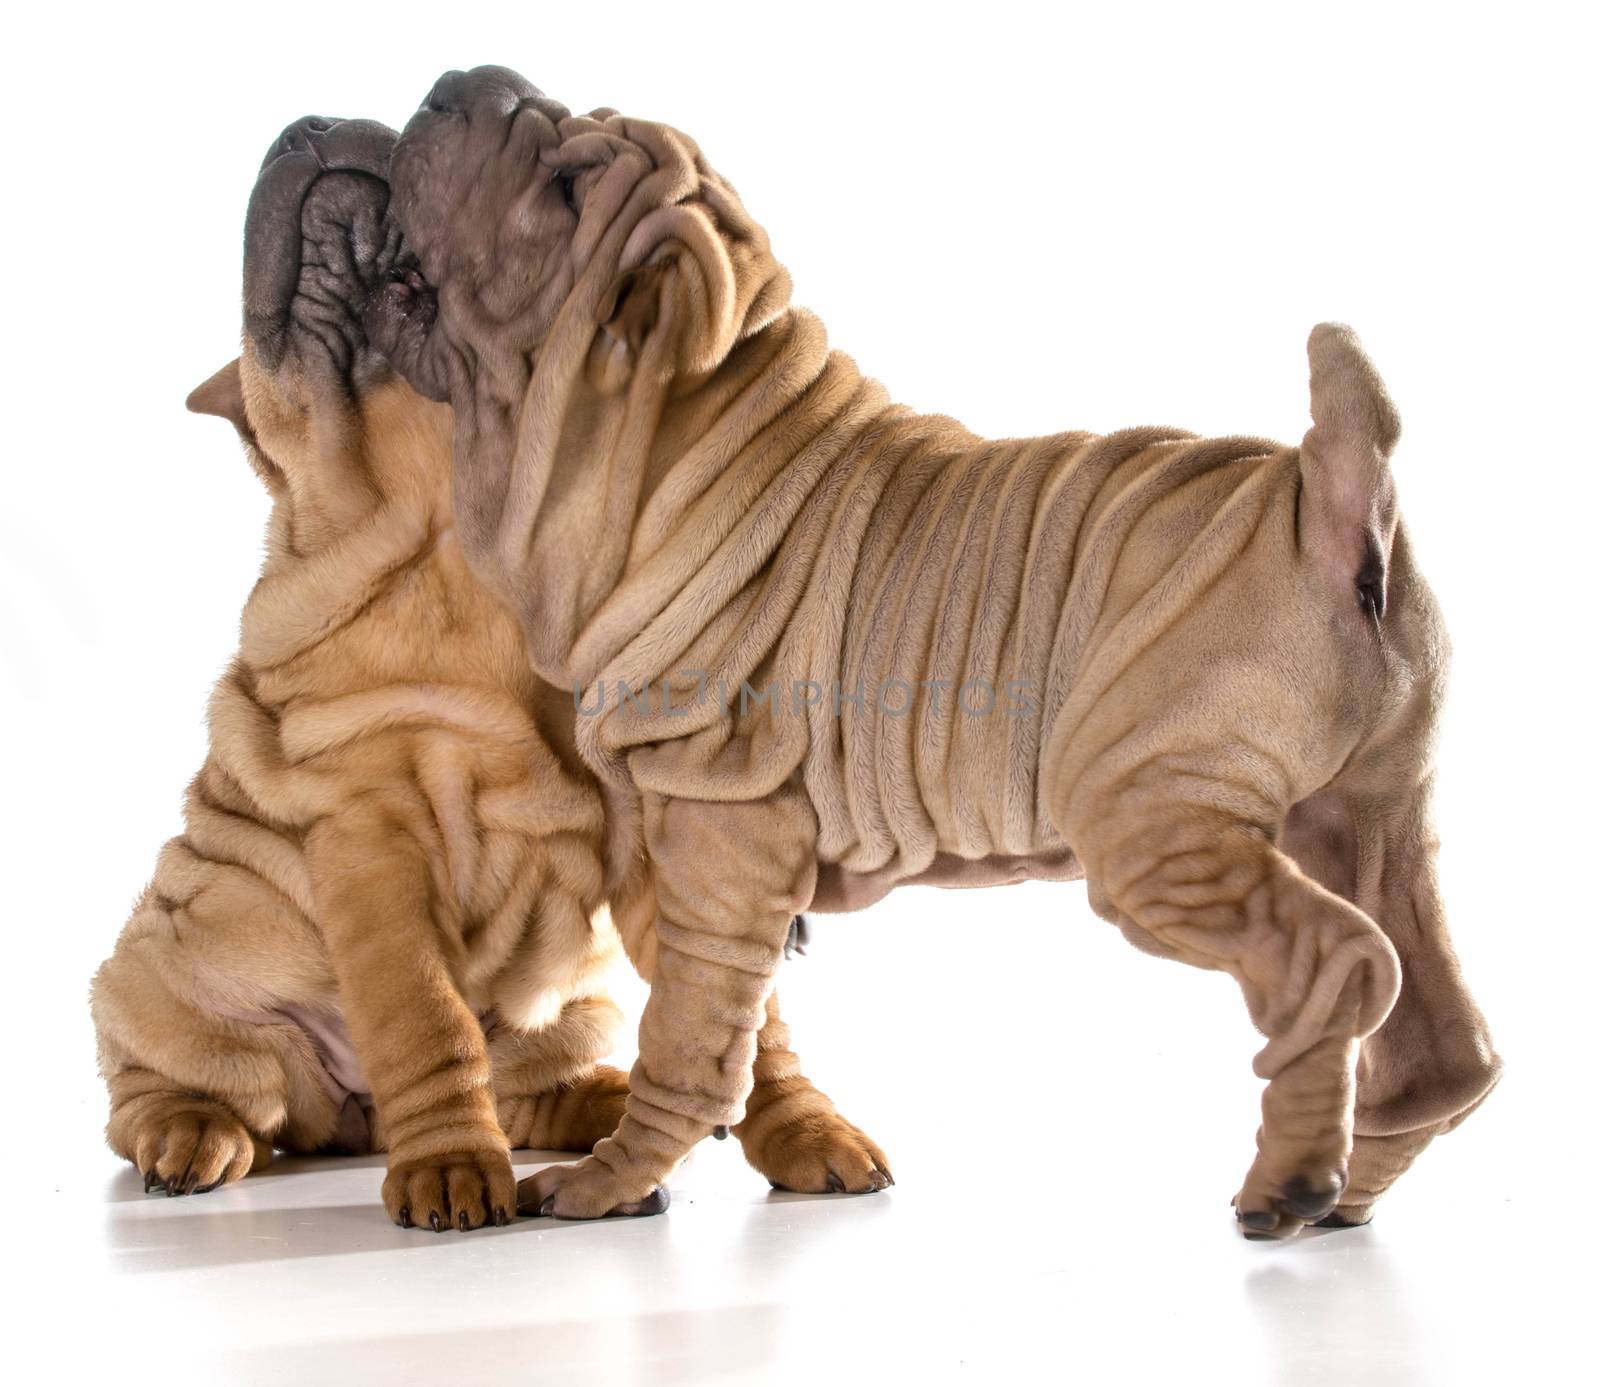 two dogs play fighting - chinese shar pei puppies isolated on white background  - 4 months old